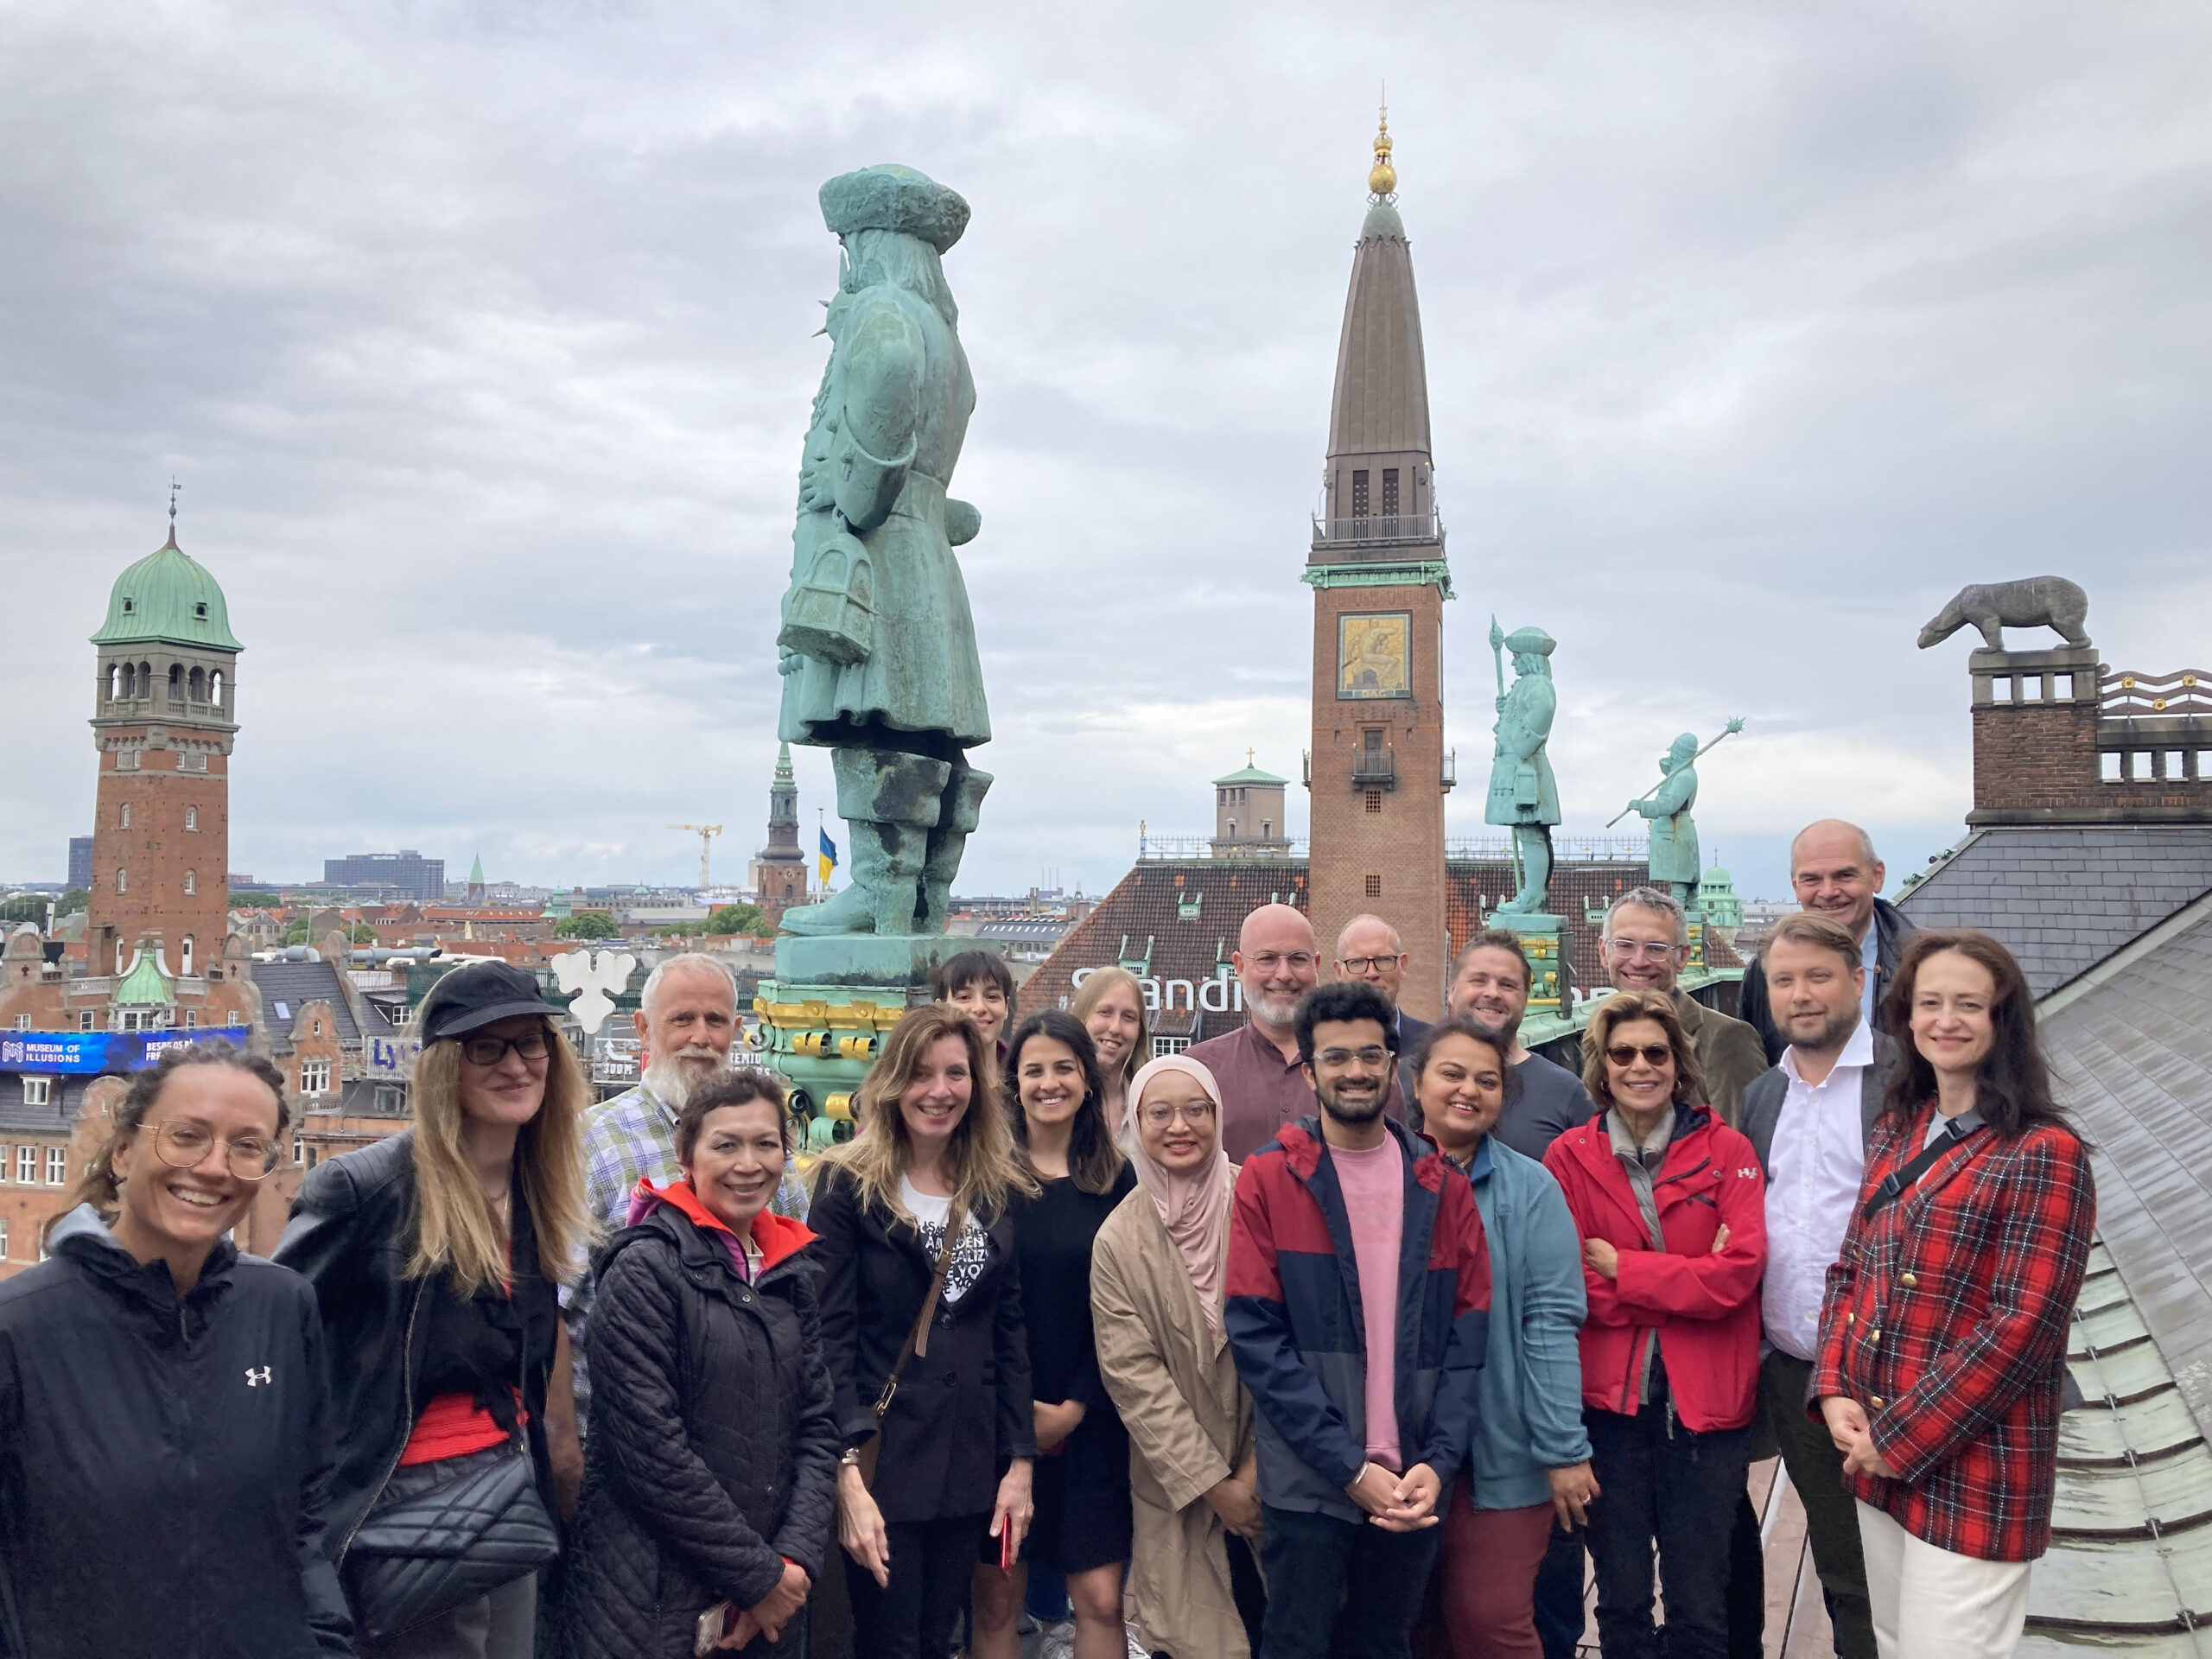 Connect Club visited the beautiful town hall in Copenhagen